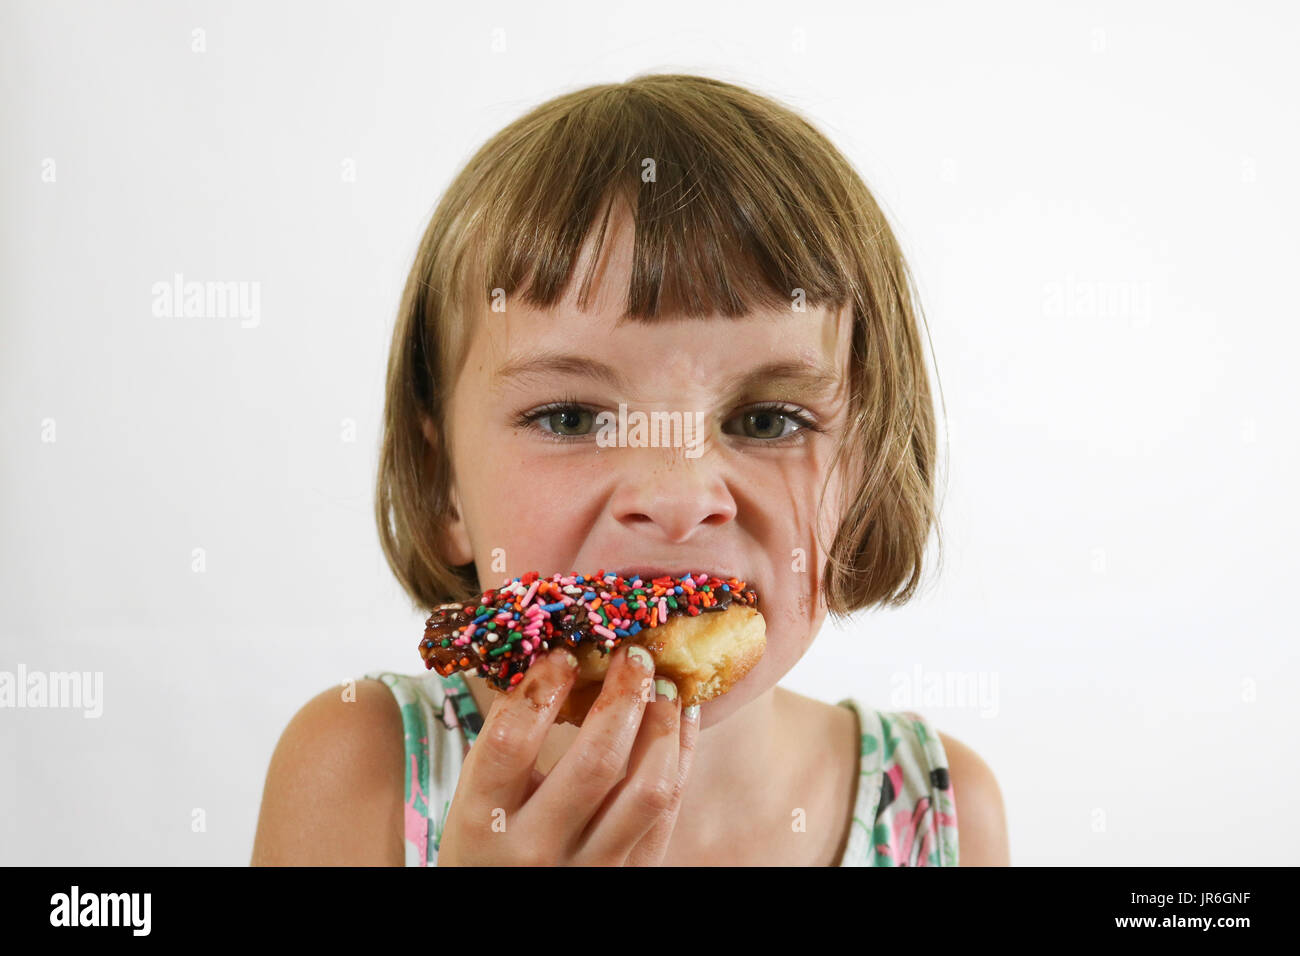 Portrait of a little brown haired girl eating a donut with colorful sprinkles Stock Photo